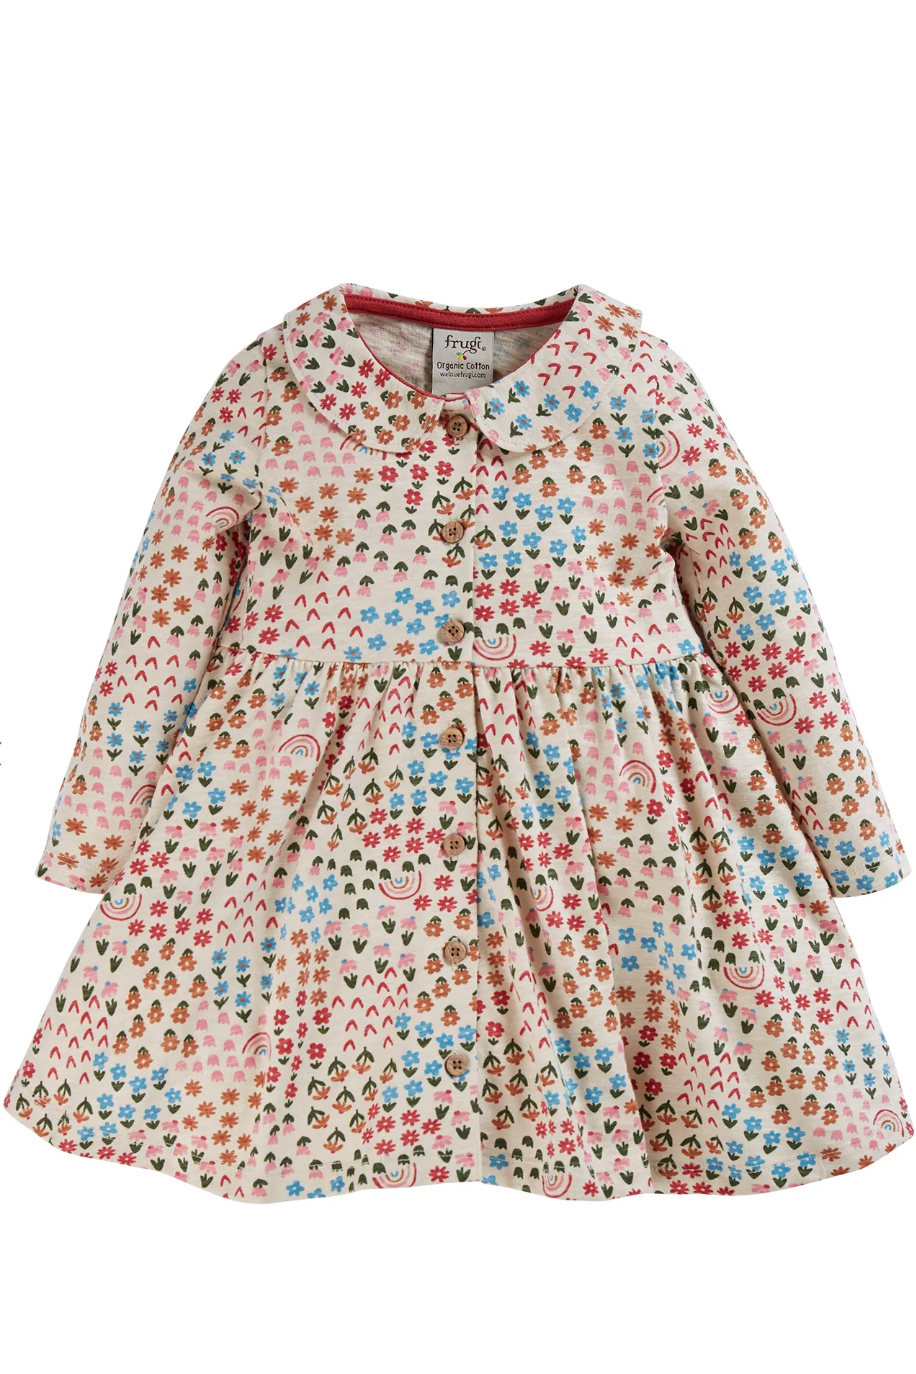 Frugi Marta Dress in Floral Fun-Kids-Ohh! By Gum - Shop Sustainable